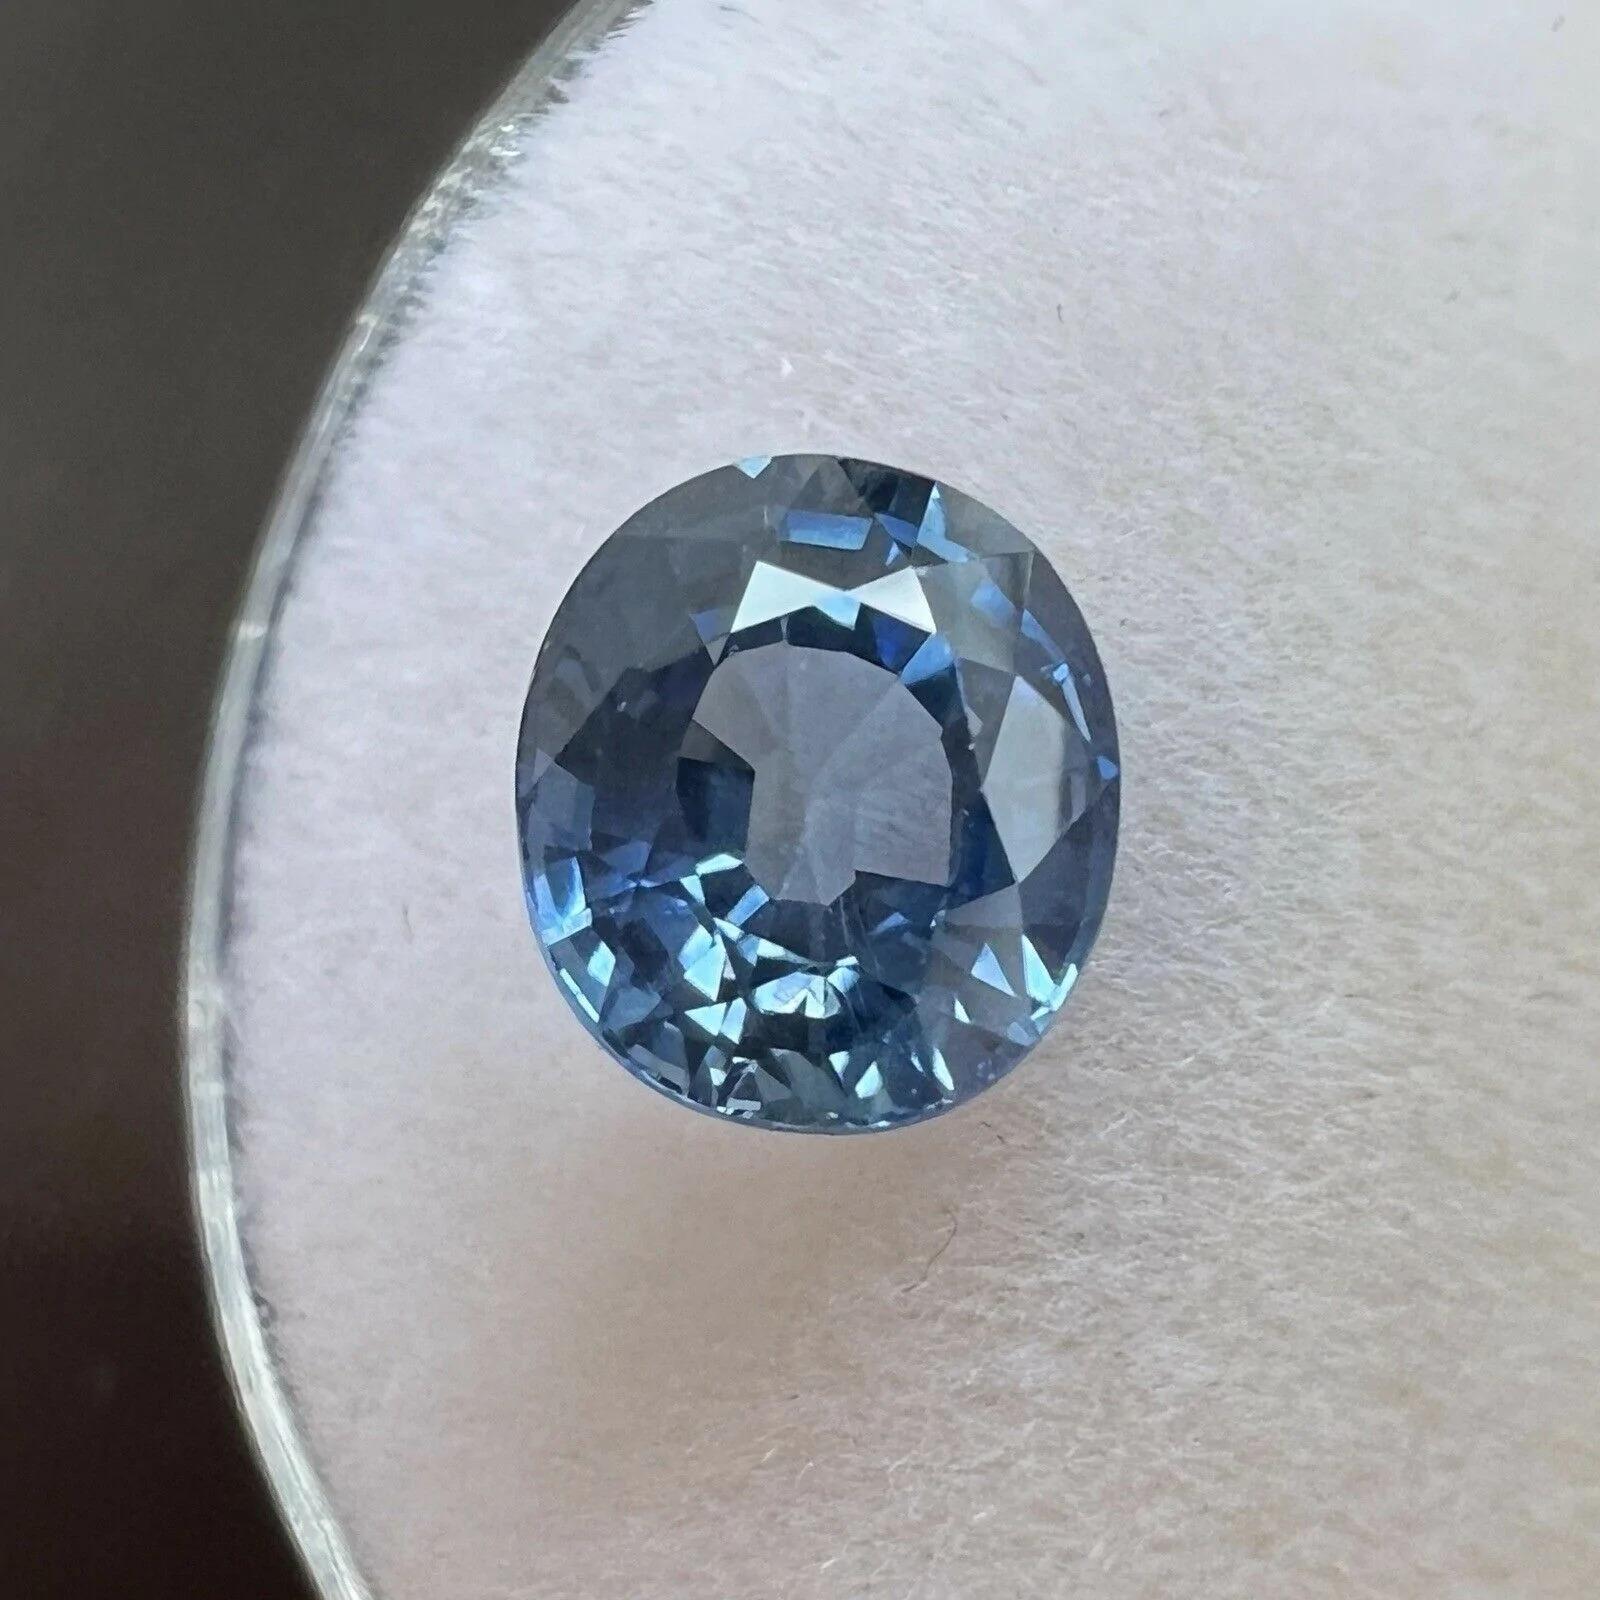 Women's or Men's 1.82ct AIG Certified Vivid Blue Sapphire Oval Cut Rare Loose Gemstone For Sale